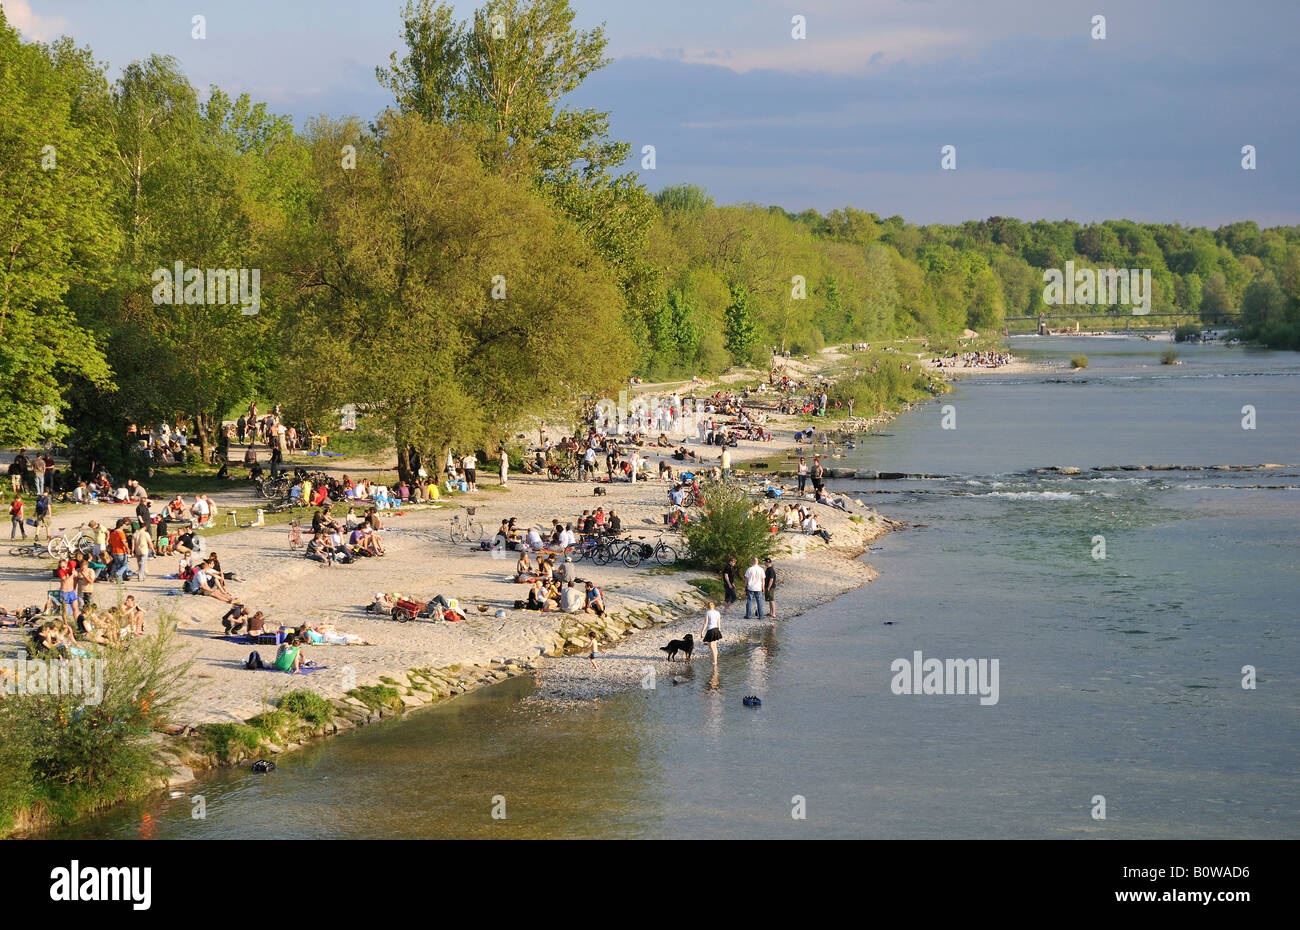 BBQ, people barbecuing along the Flaucher, an offshoot of the Isar River, Munich, Upper Bavaria, Germany Stock Photo